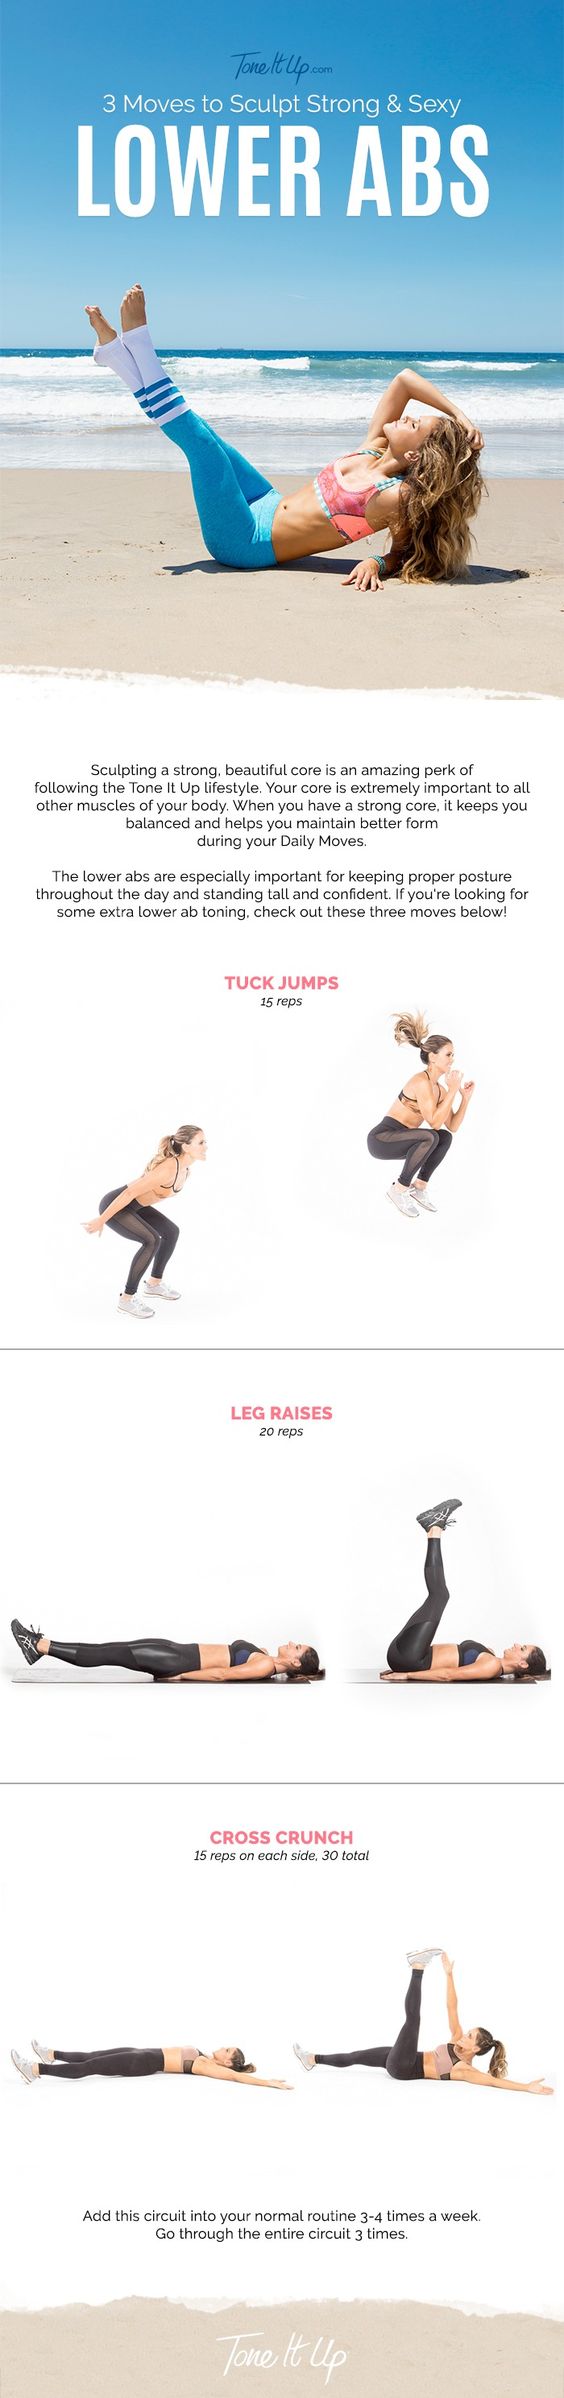 The Lazy Girls Lower Ab Workout